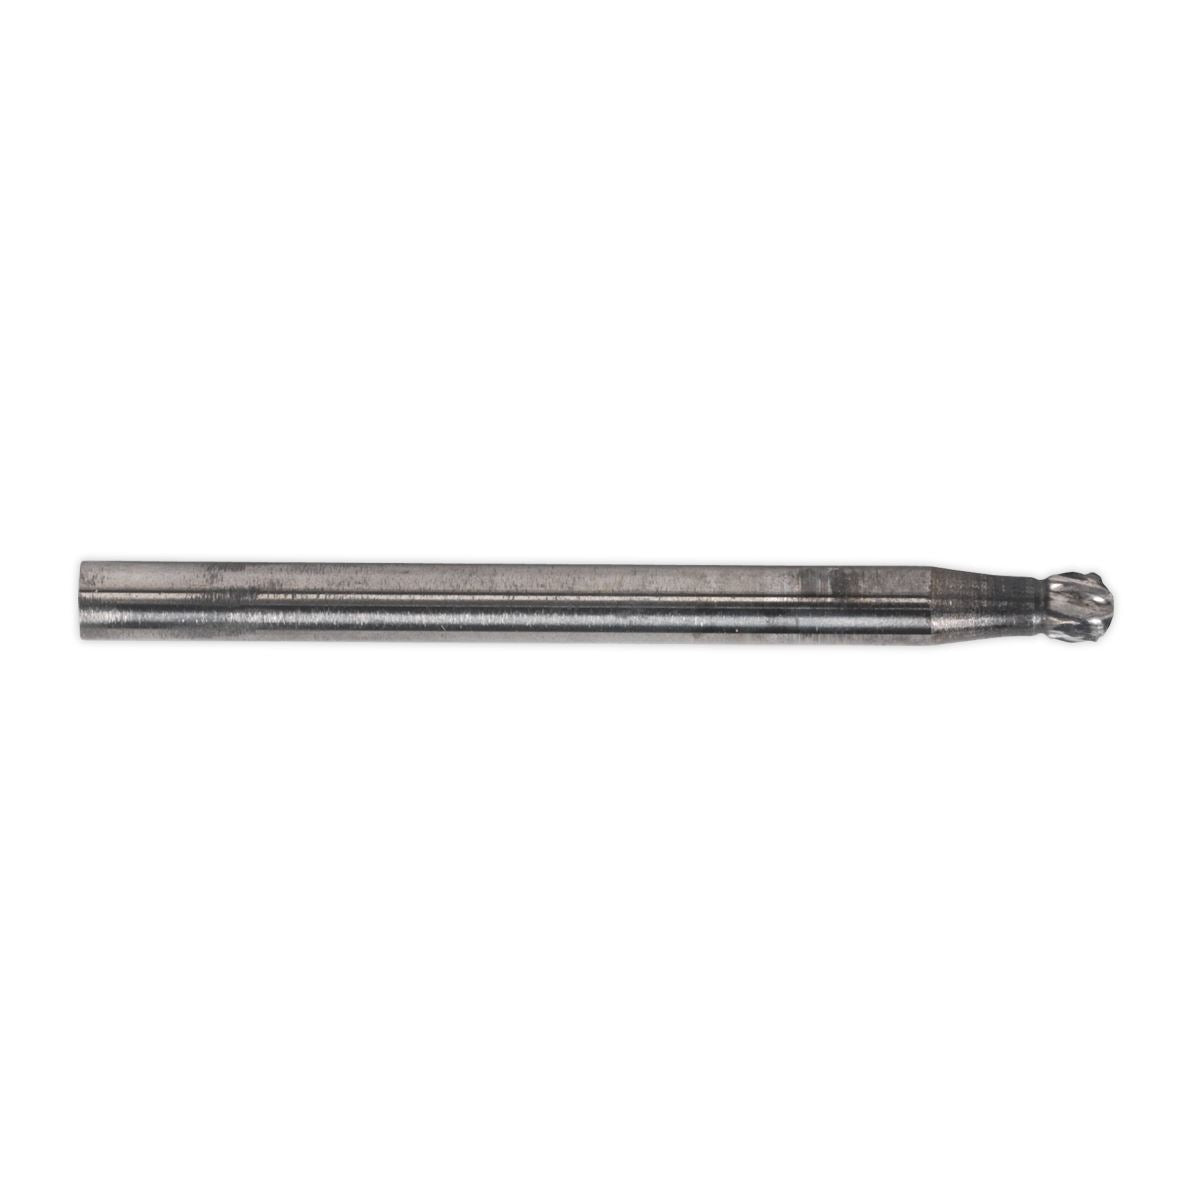 Sealey Micro Carbide Burr Ball 3mm Pack of 3